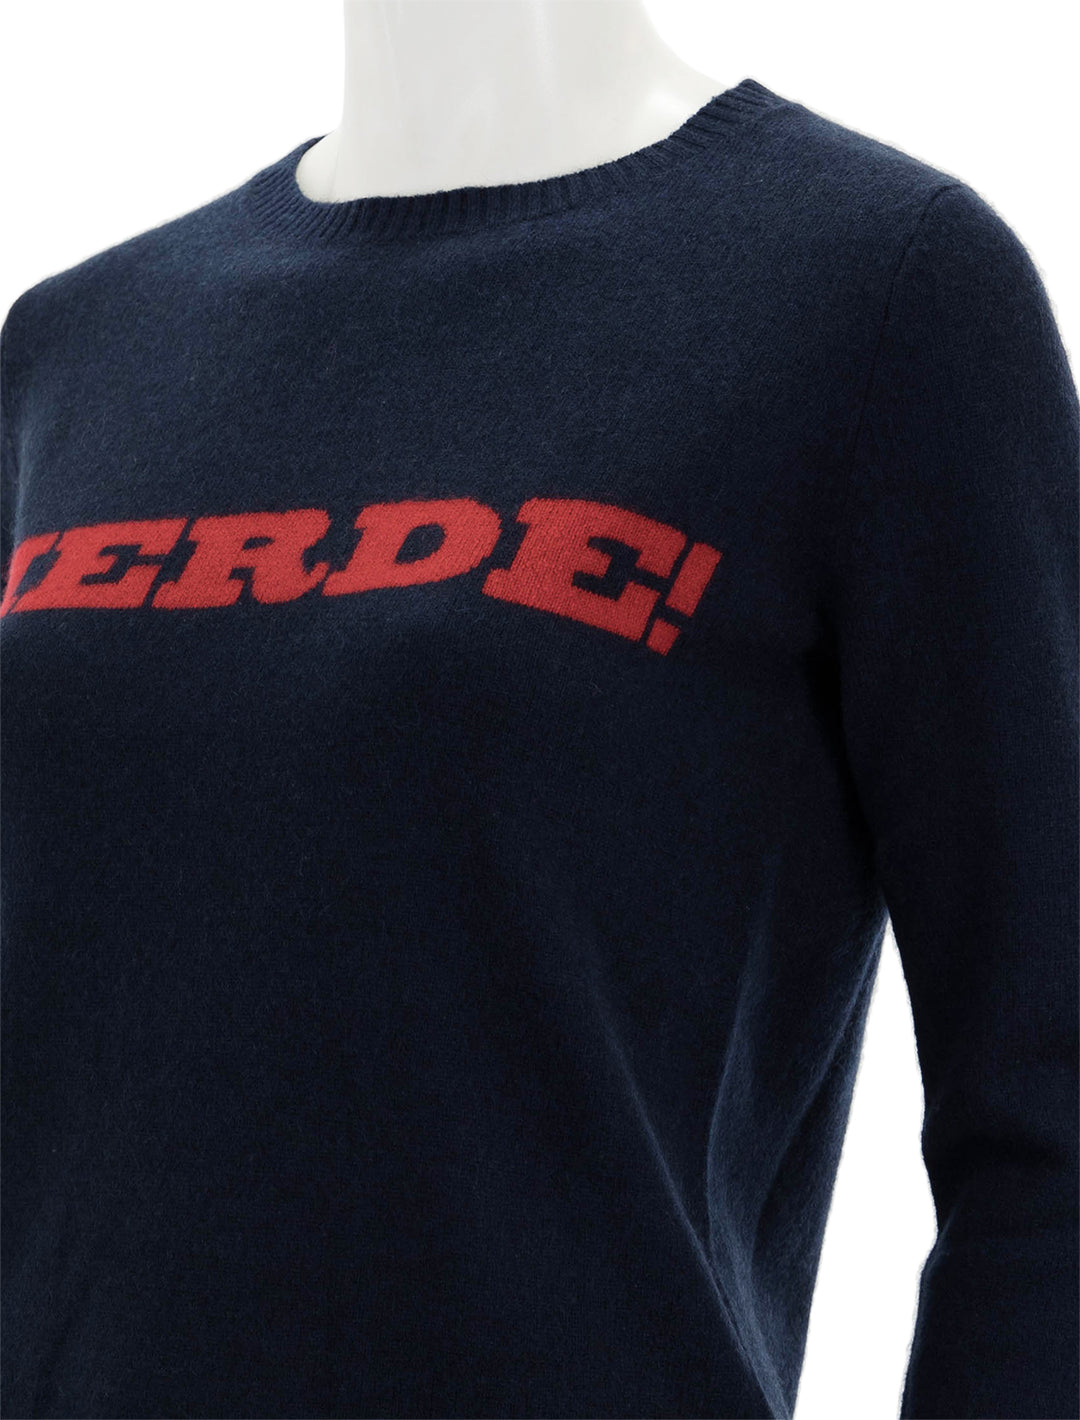 Close-up view of Jumper 1234's merde sweater in navy and red.